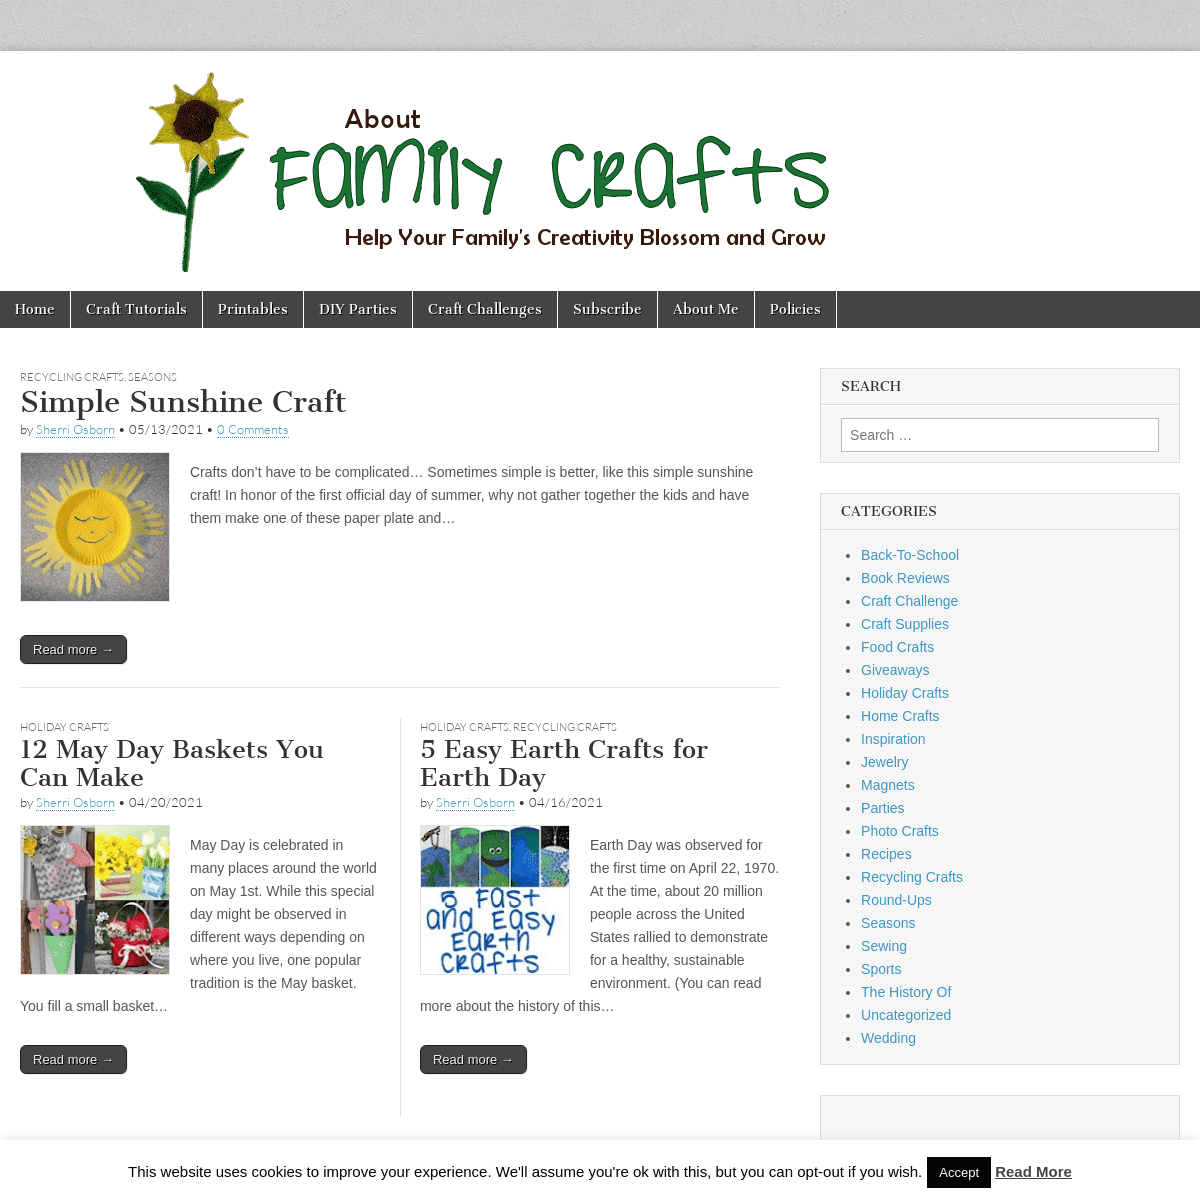 A complete backup of https://aboutfamilycrafts.com